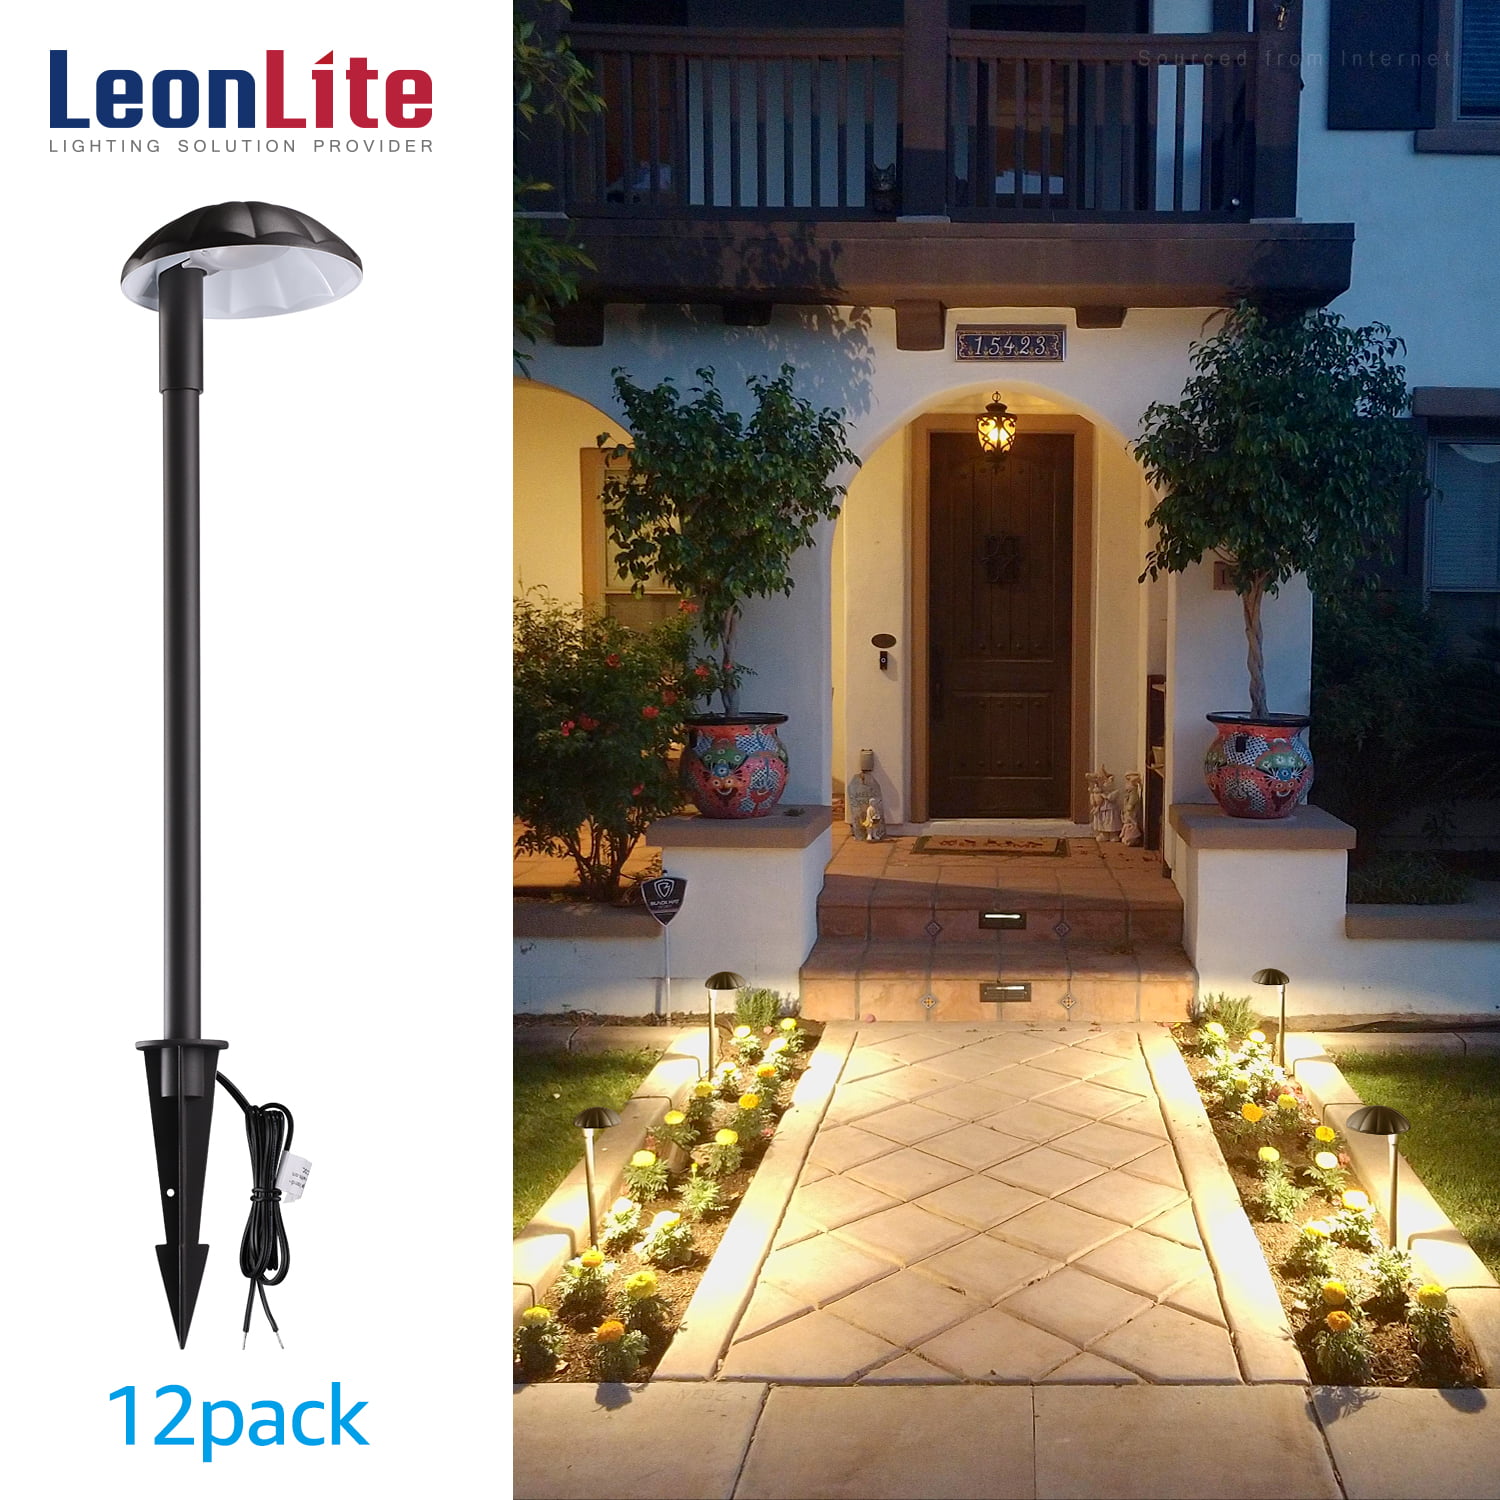 LEONLITE 12 Pack Low Voltage LED Landscape Lighting, 5W 12V Wired Outdoor  Pathway Lights, Aluminum Walkway Driveway Light